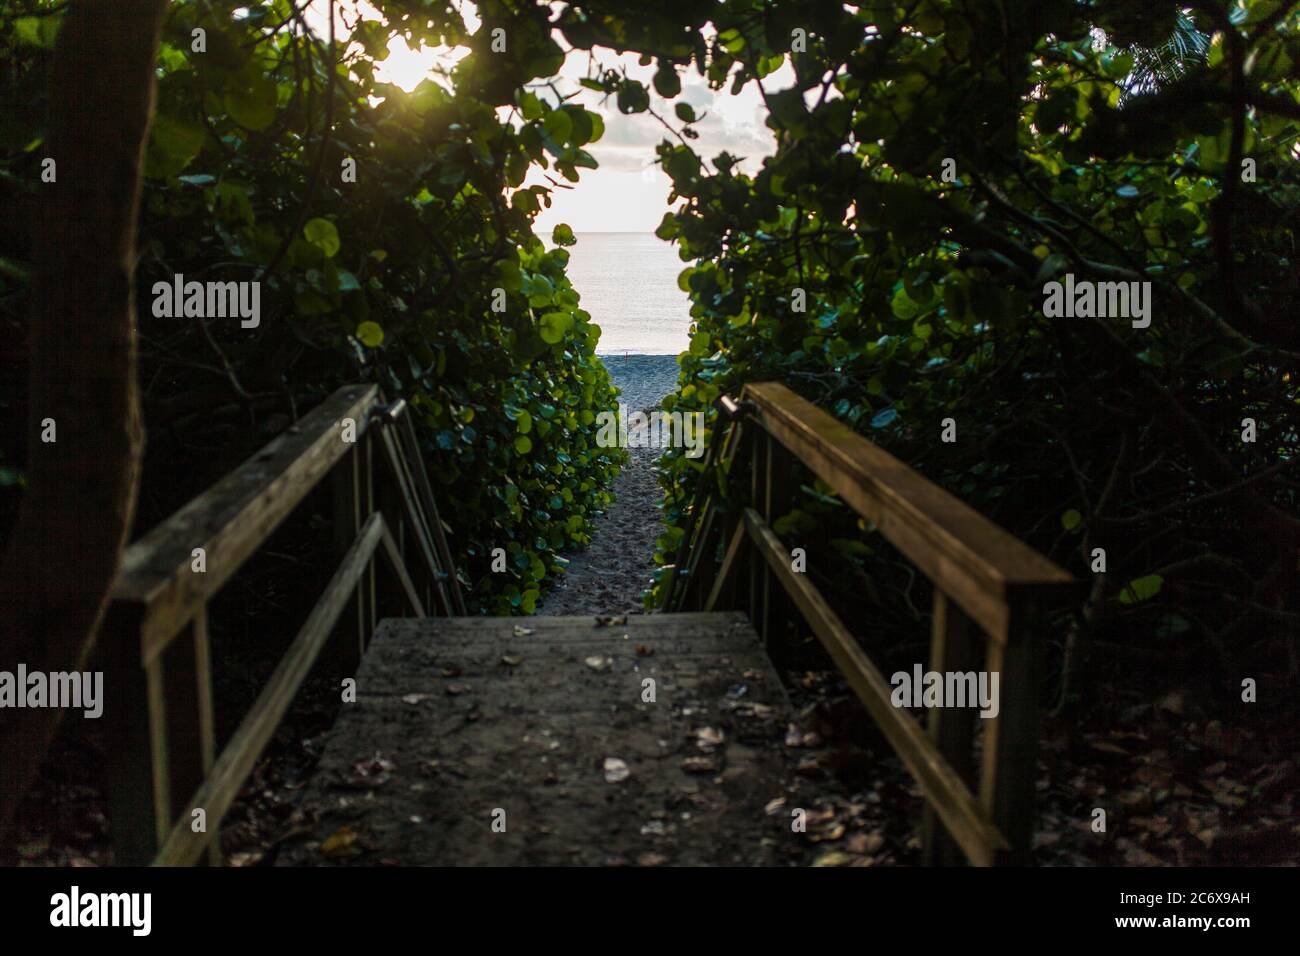 Looking down the steps of a wooden deck leading to Juno Beach on the Atlantic Ocean in Florida's East Coast Stock Photo